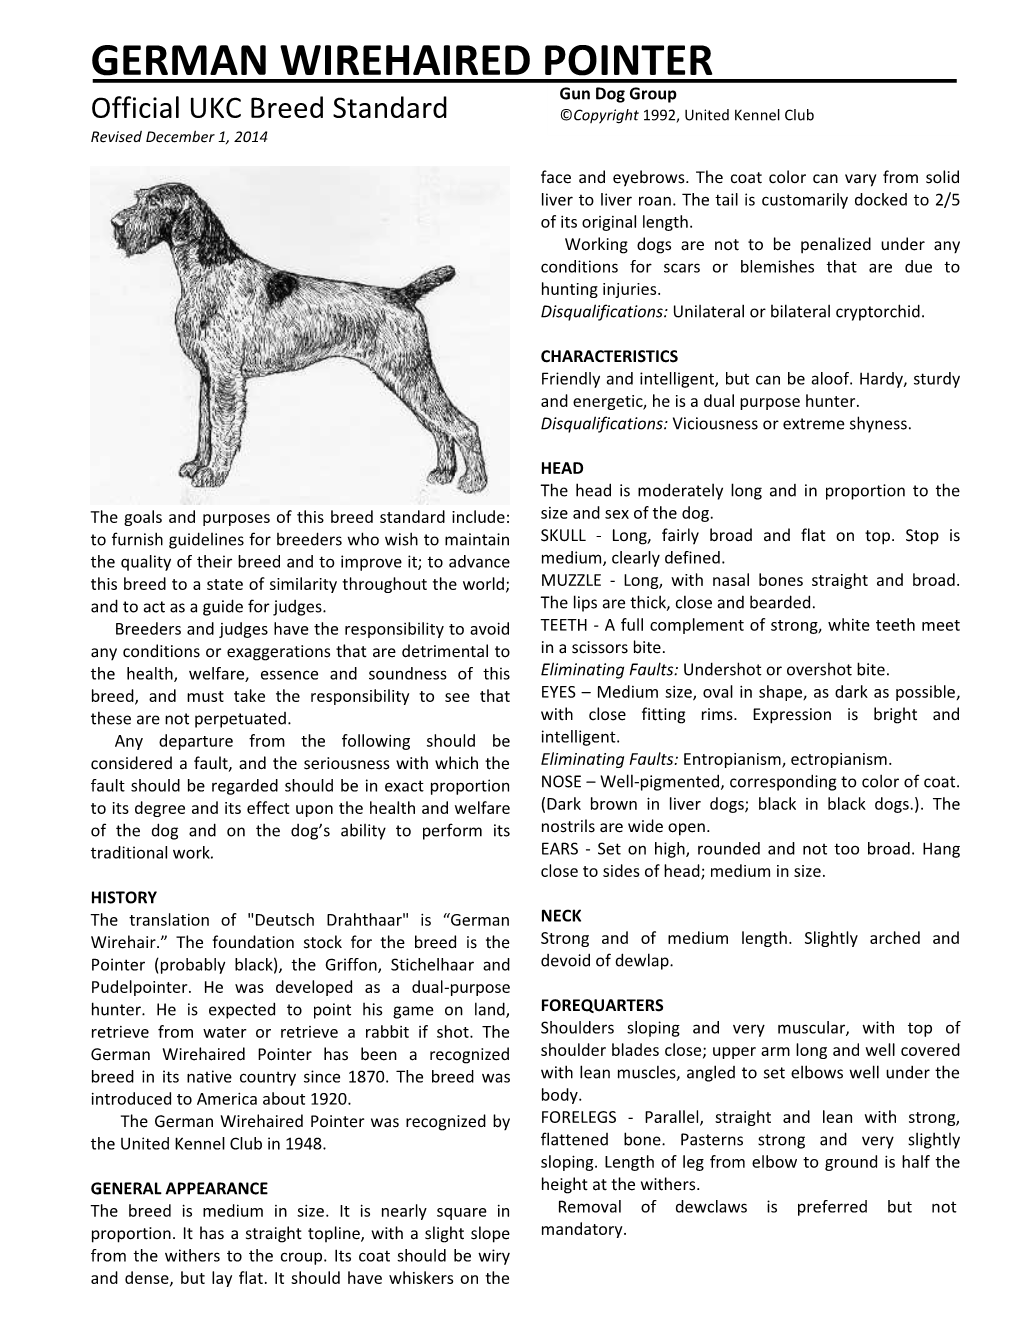 GERMAN WIREHAIRED POINTER Gun Dog Group Official UKC Breed Standard ©Copyright 1992, United Kennel Club Revised December 1, 2014